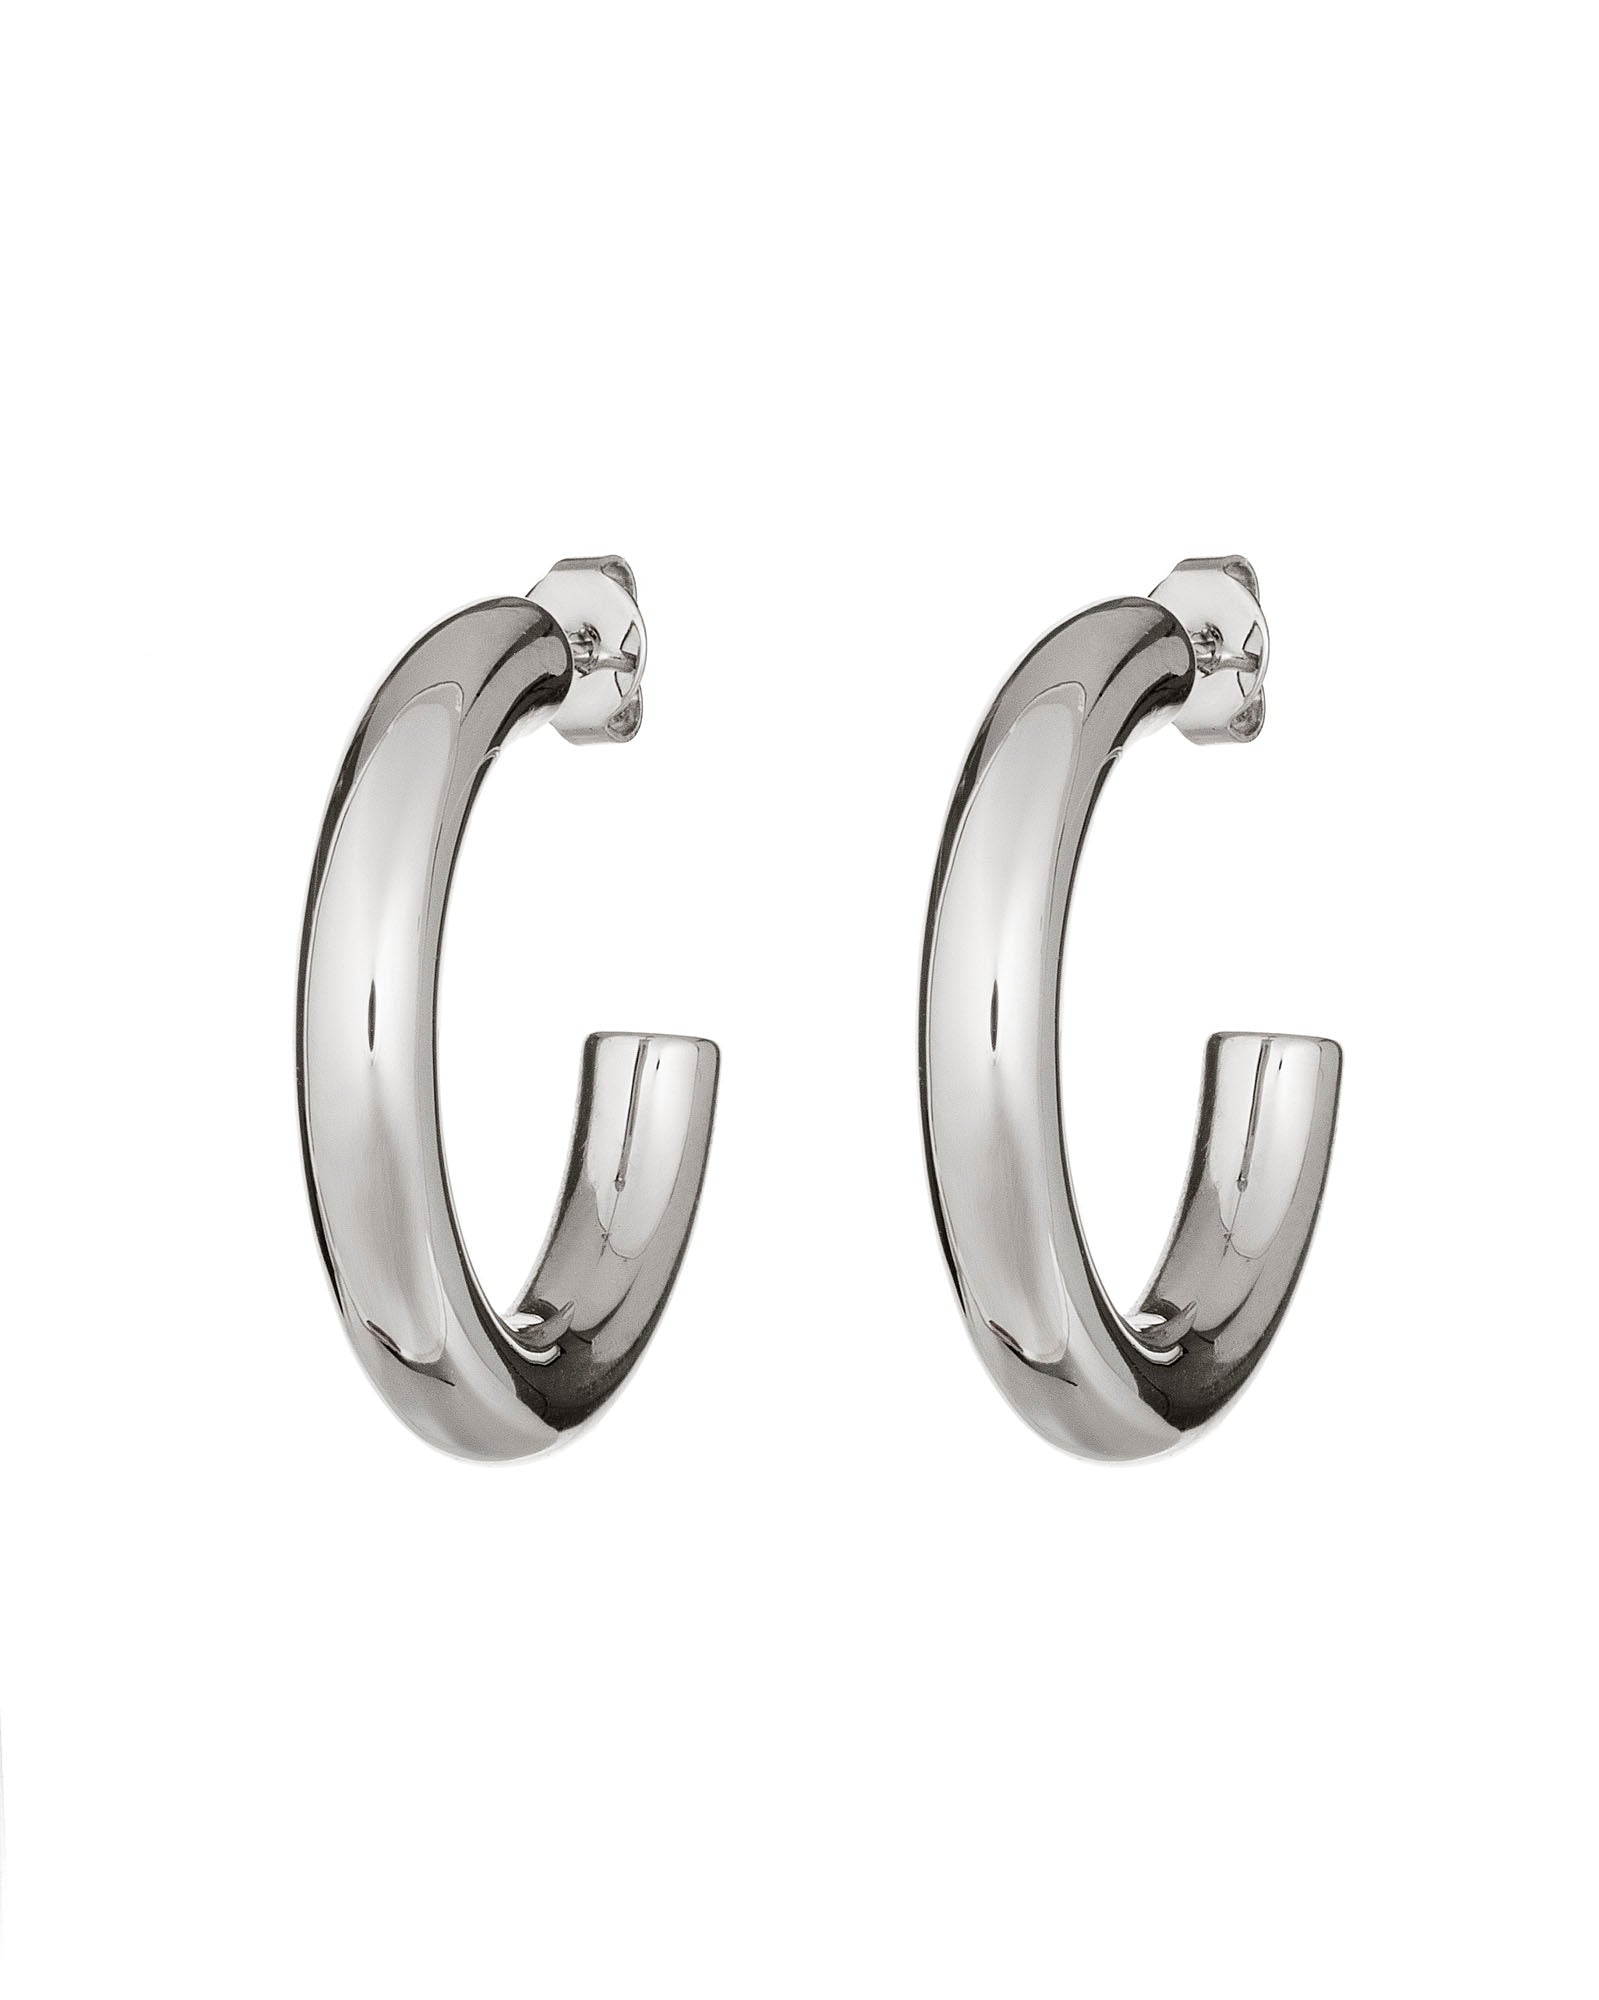 Sale - Large Chunky Silver Hoops